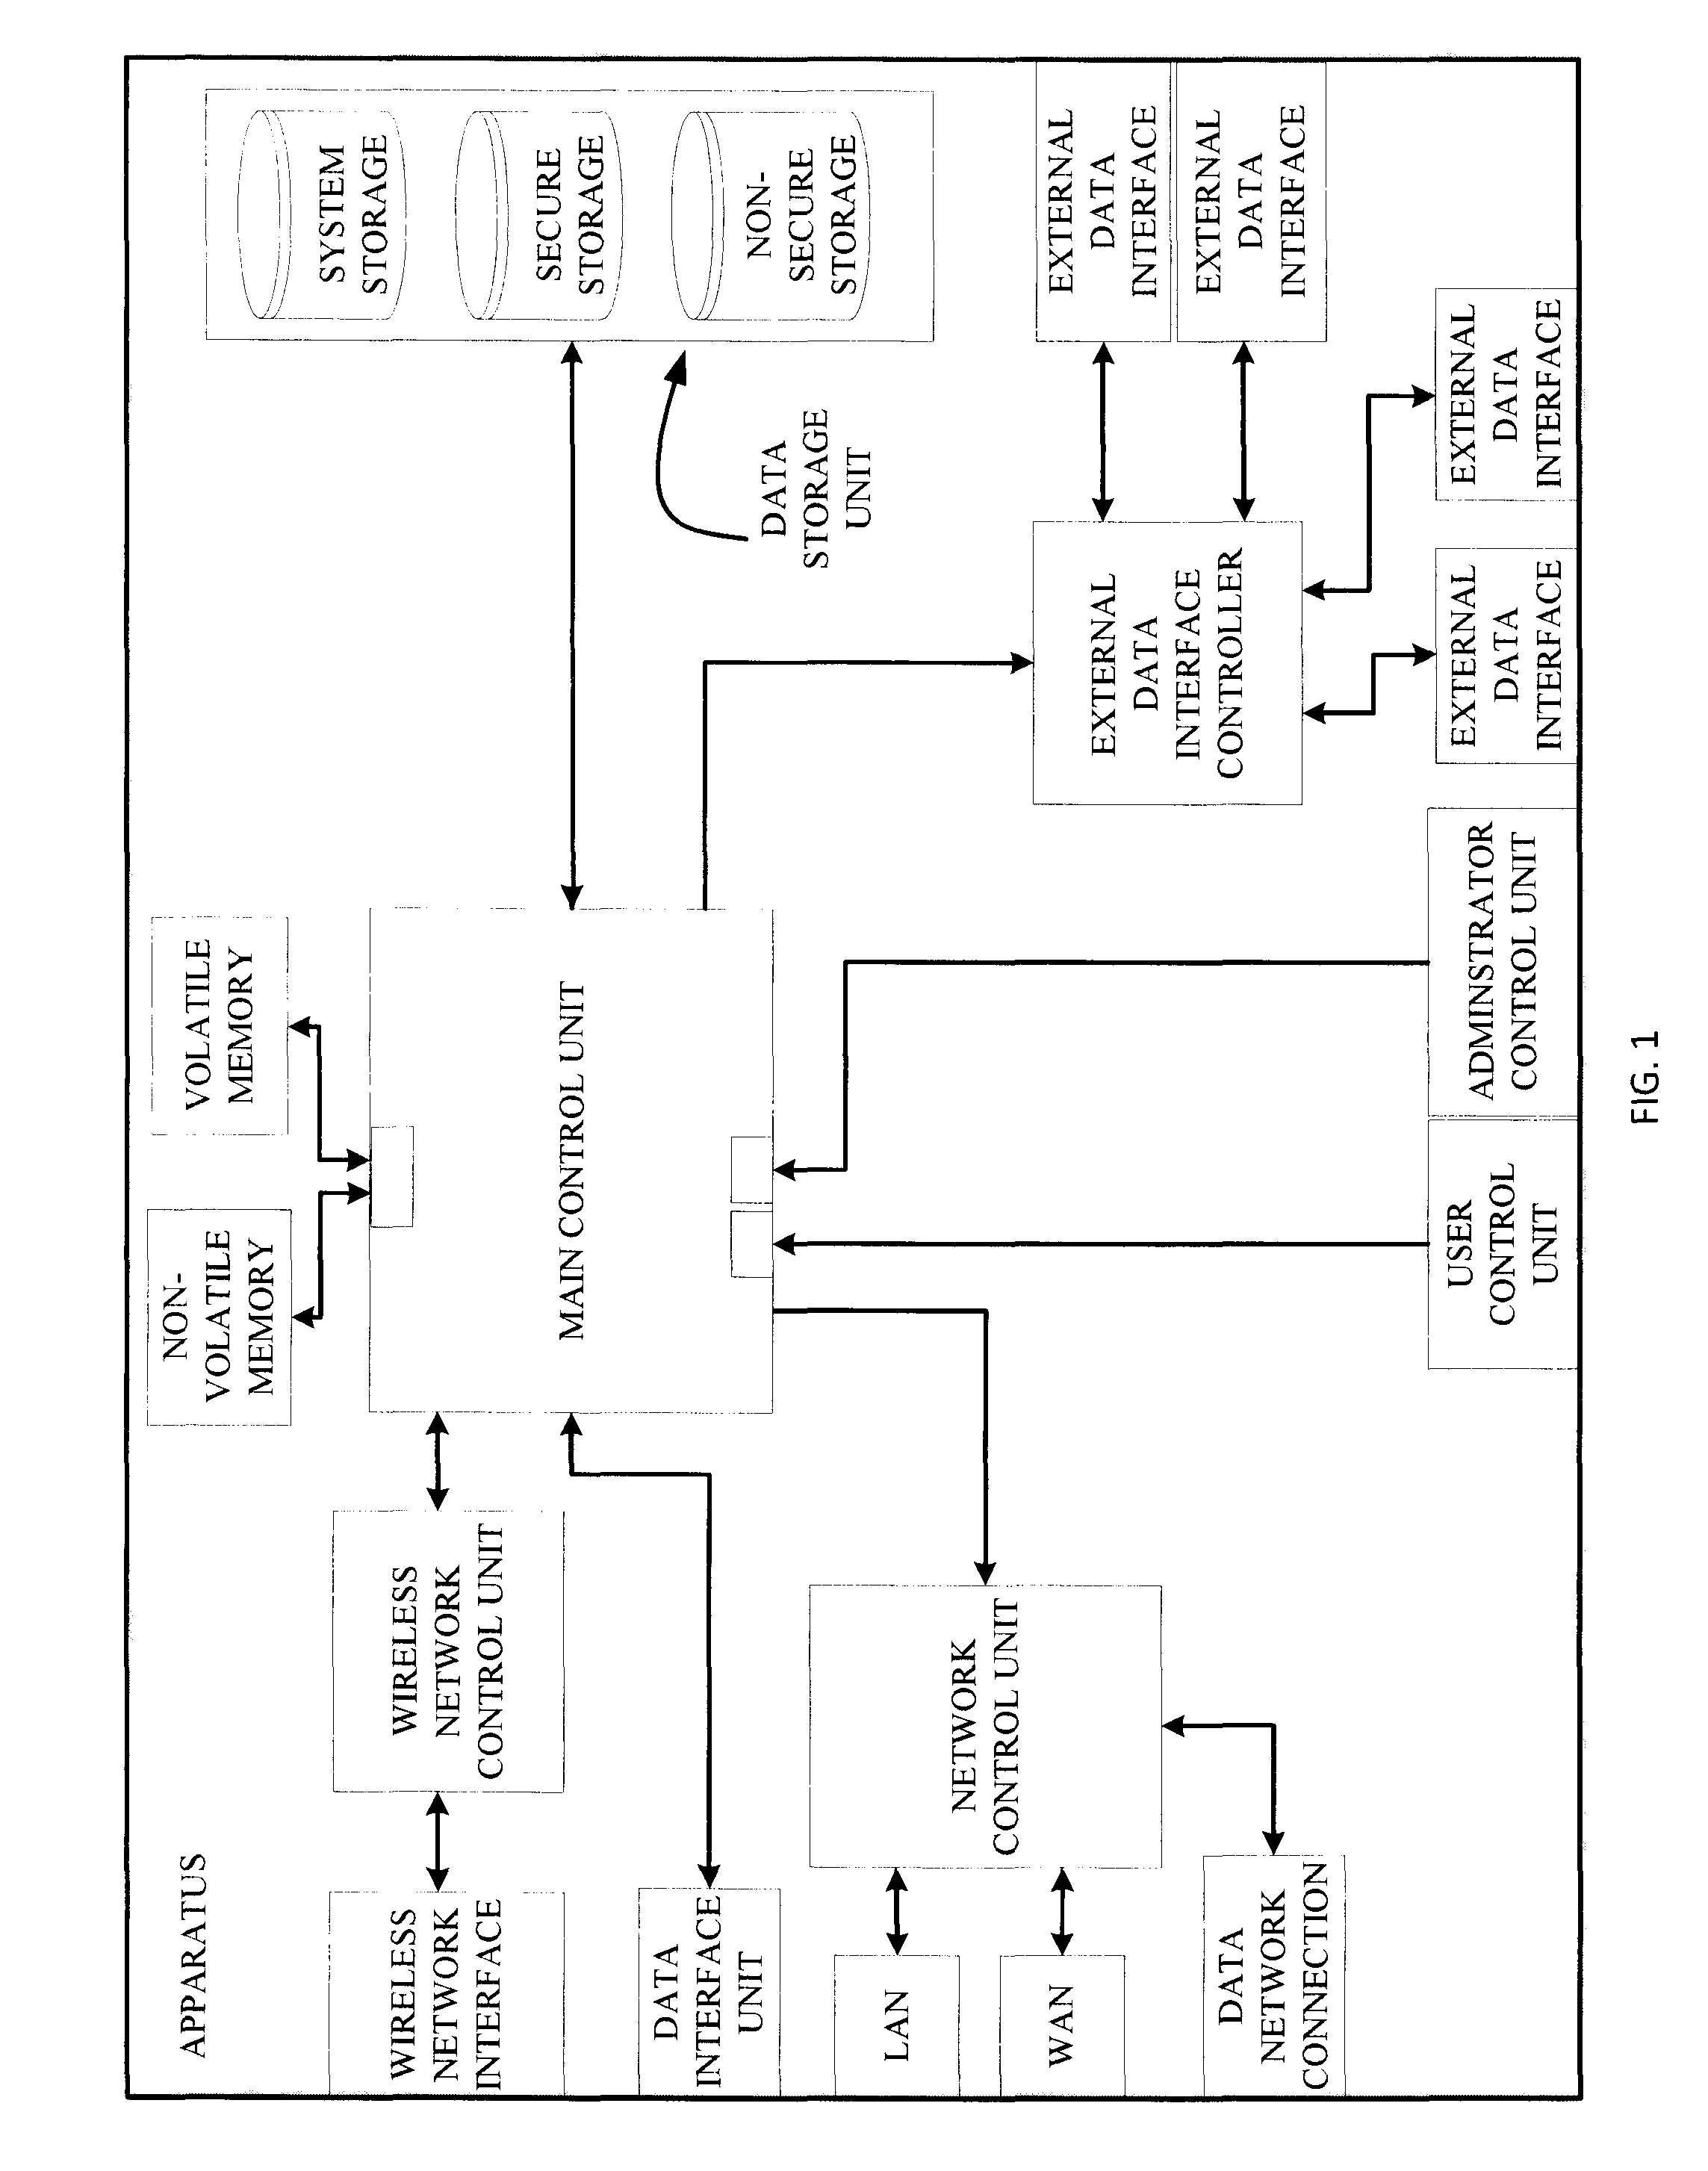 Apparatus and method for protection of stored data